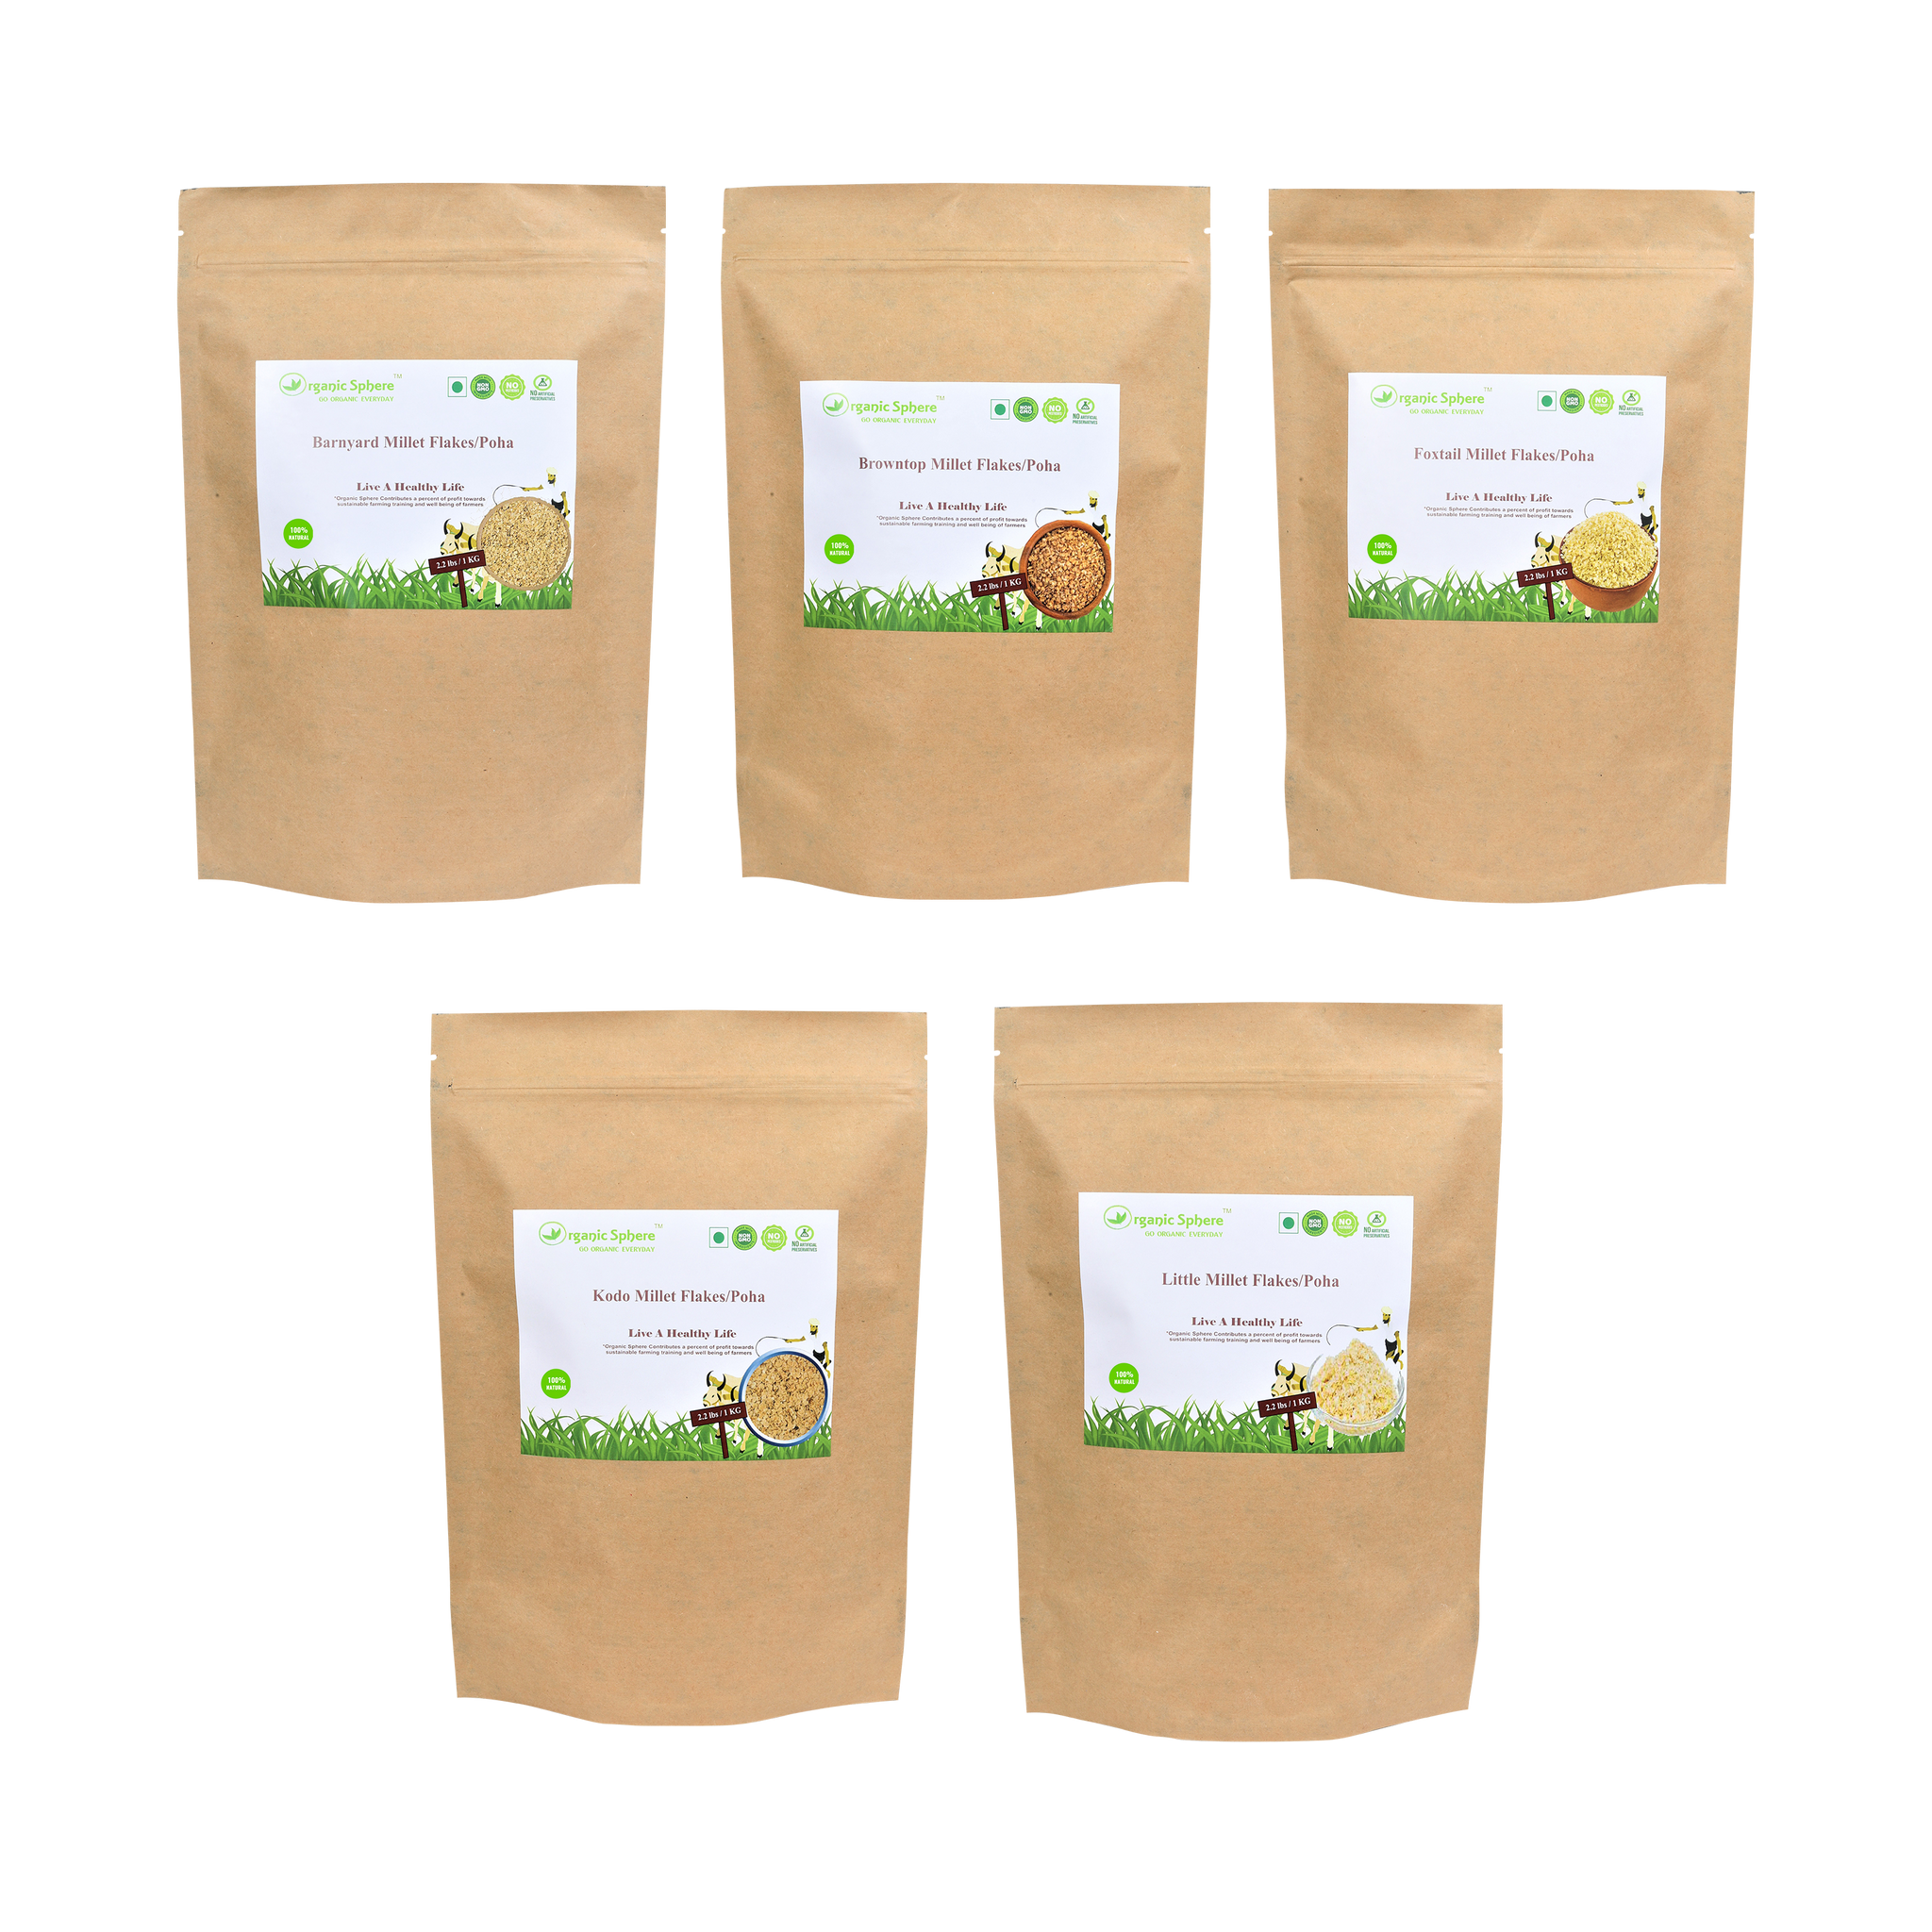 100% Natural Little Millet Rice Flakes (Poha)